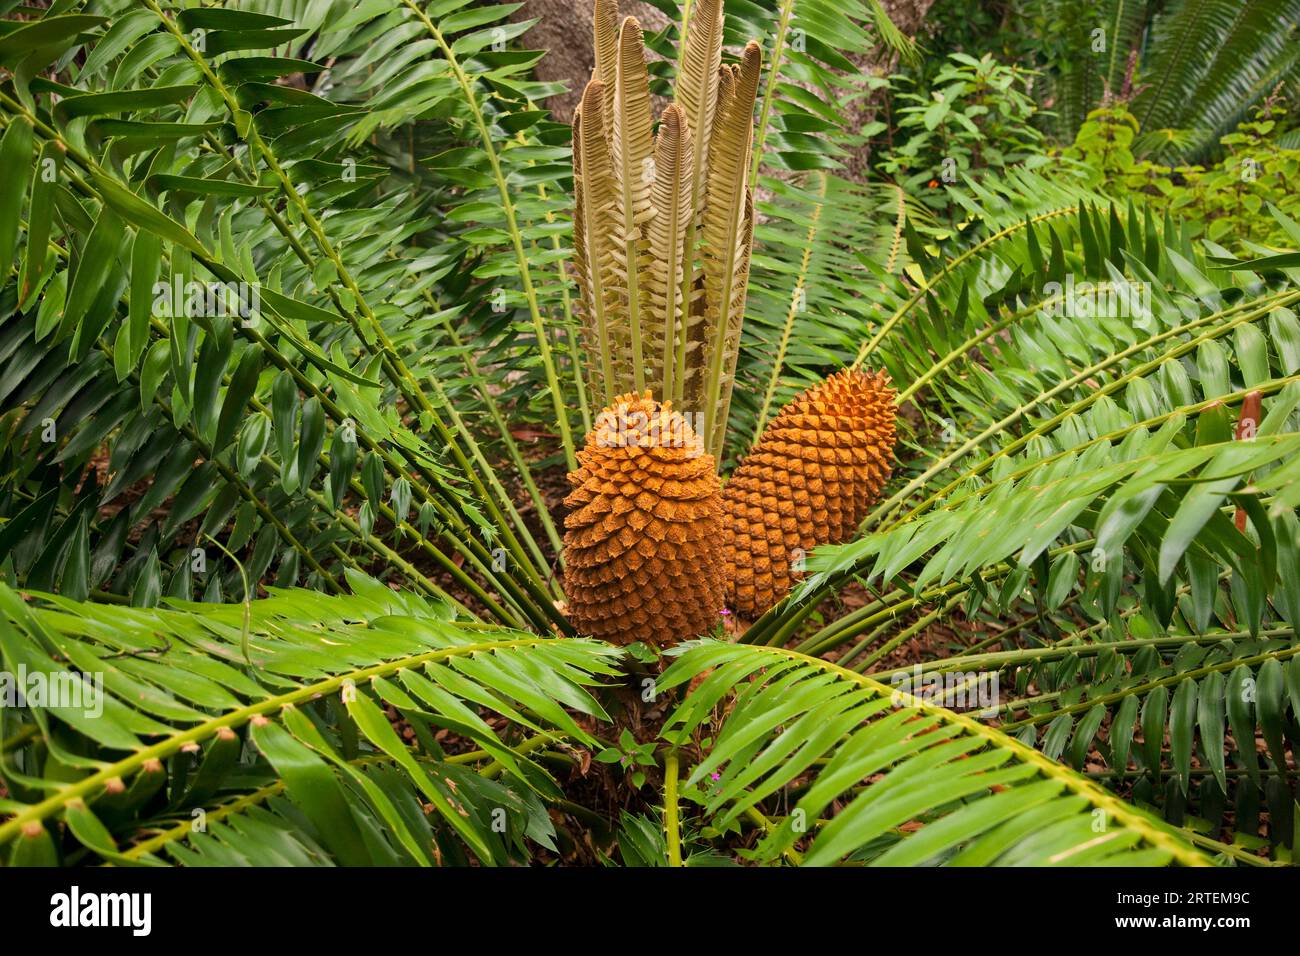 Growths resembling pine cones in a large, fern-like plant; Cape Town, South Africa Stock Photo